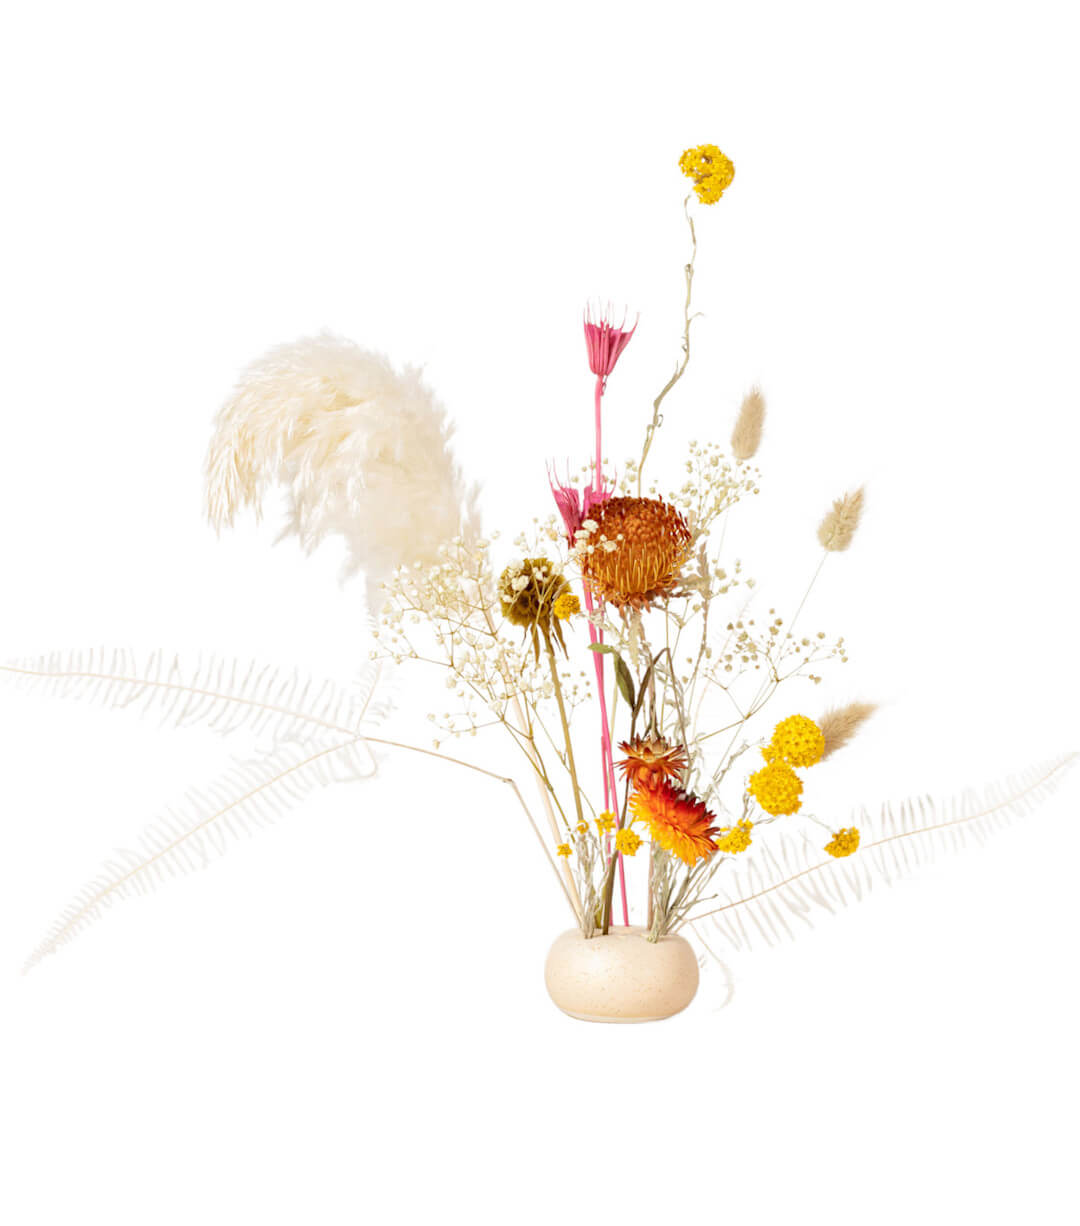 Preserved and dried flowers from Shida Preserved Flowers